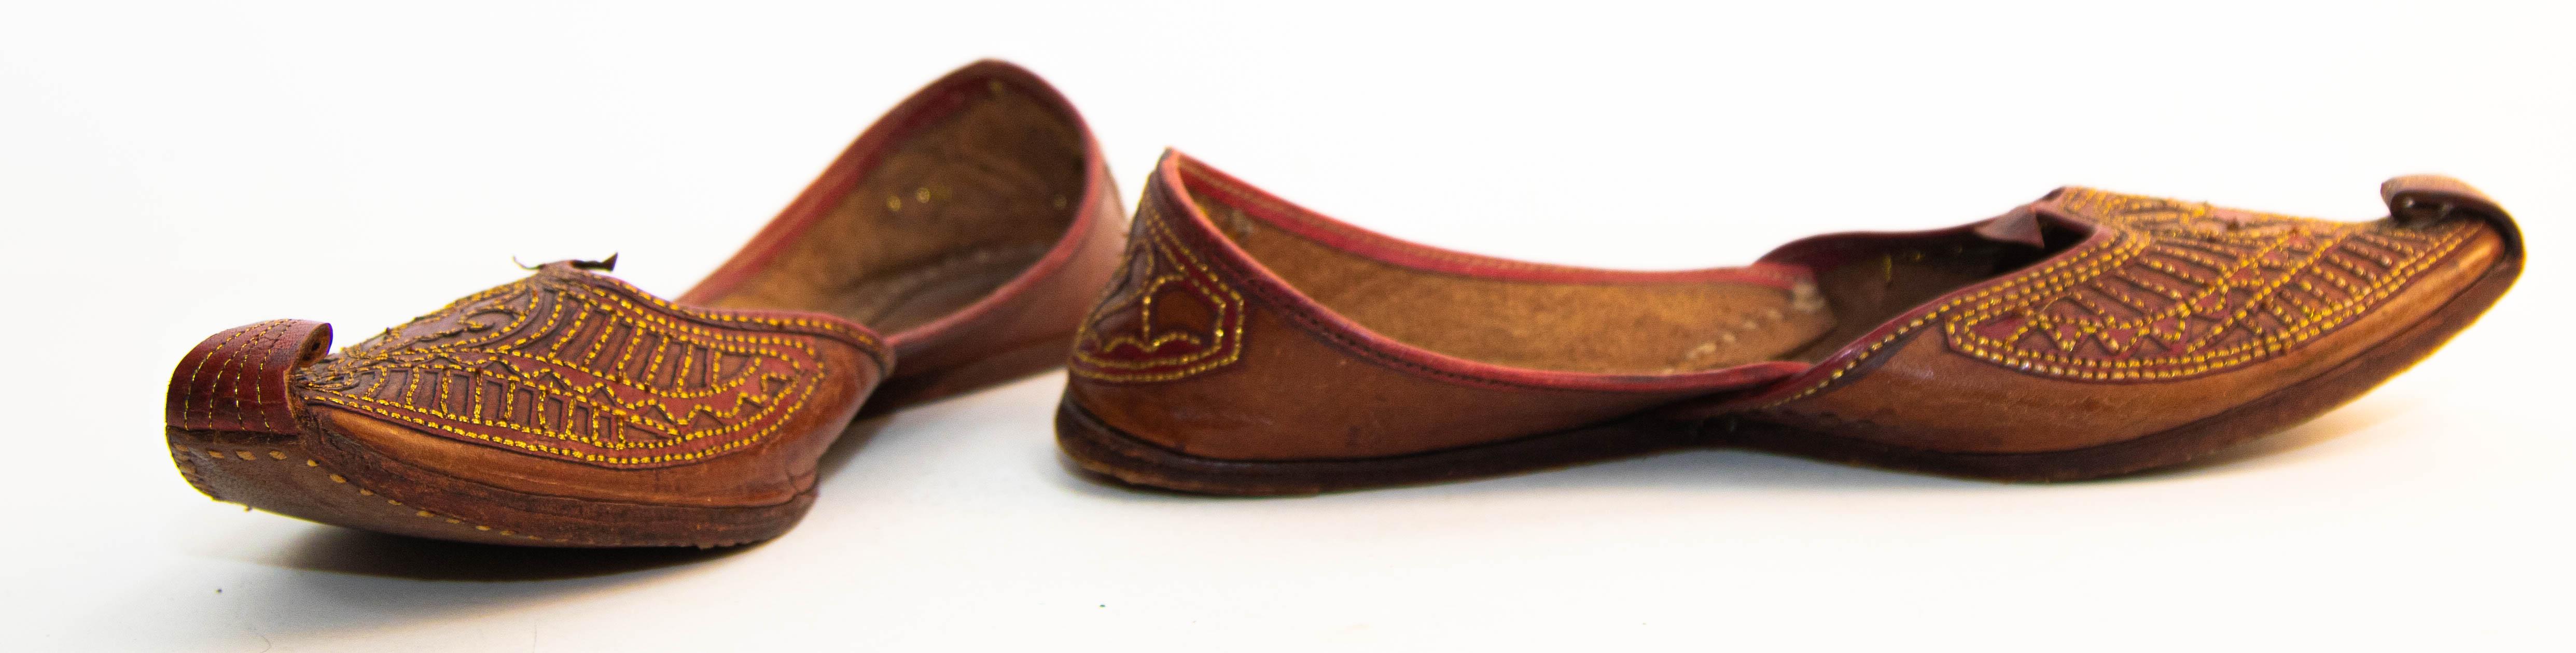 Vintage Arabian Mughal Leather Shoes with Gold Embroidered Curled Toe For Sale 2